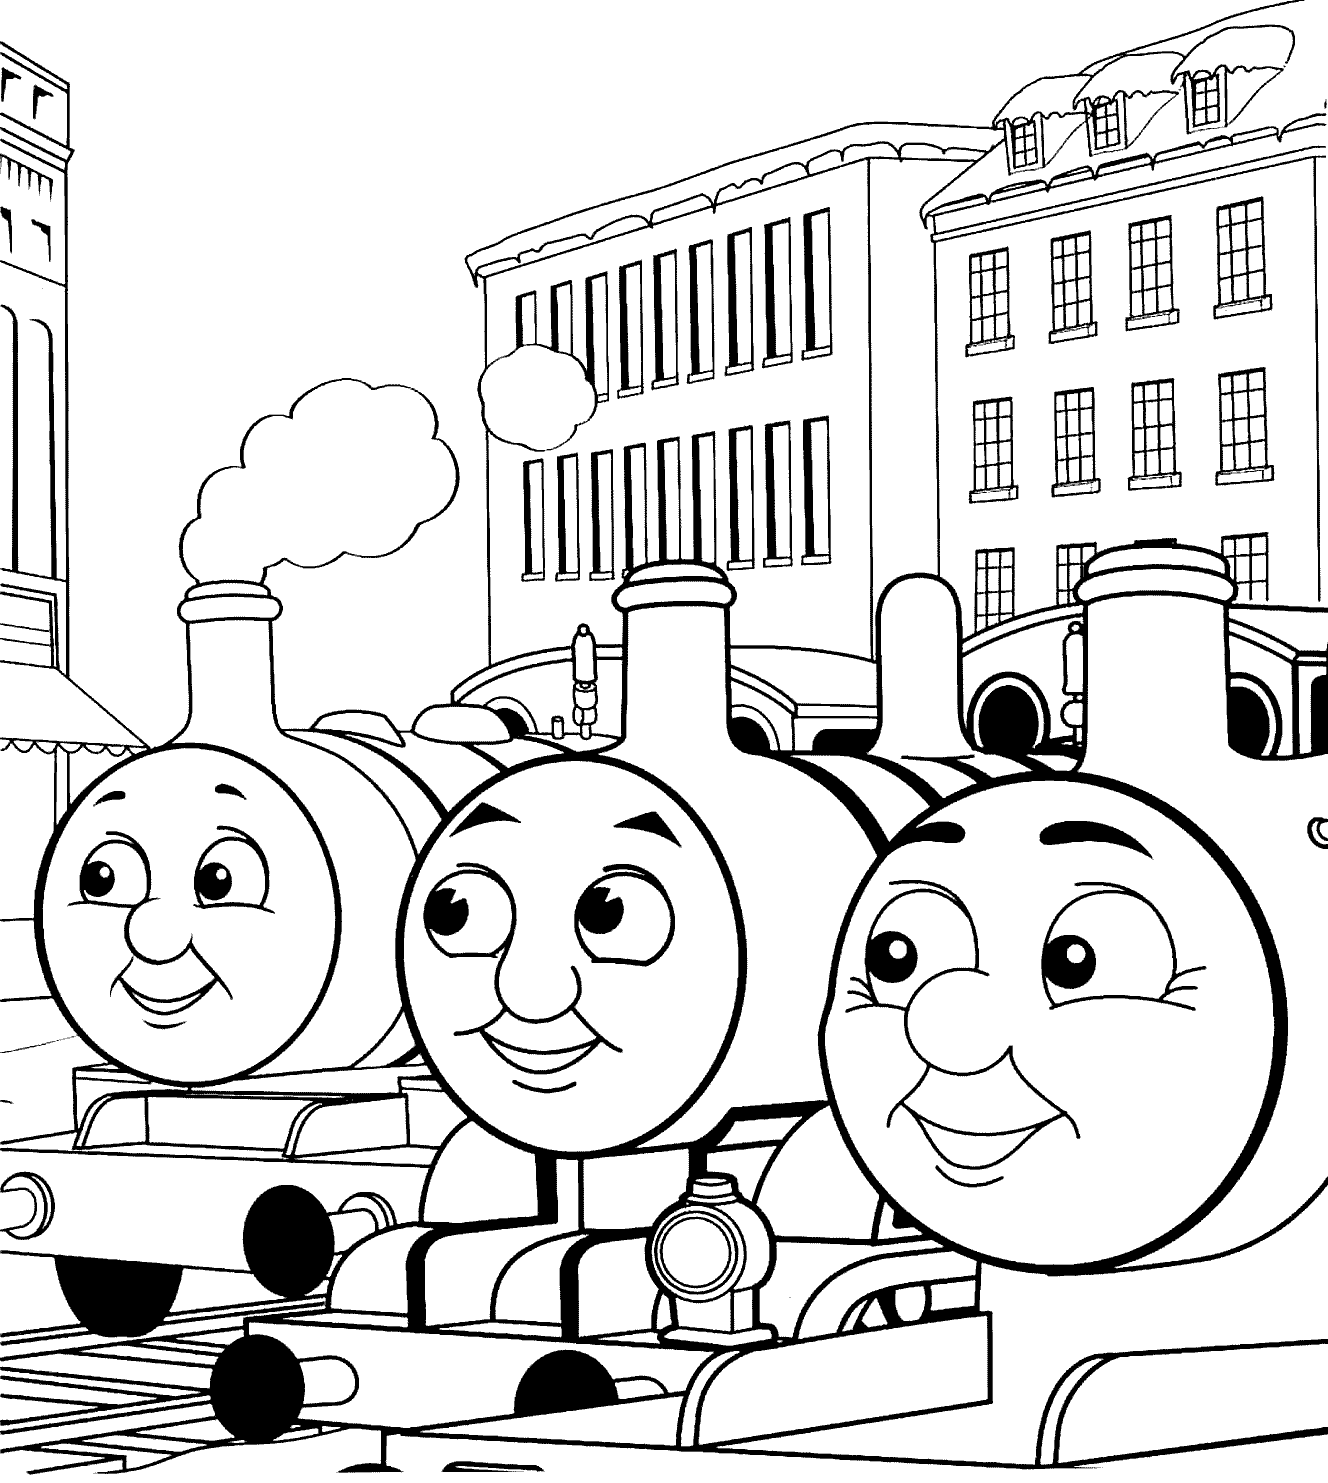 Friendship Coloring Pages Printable - Coloring Home